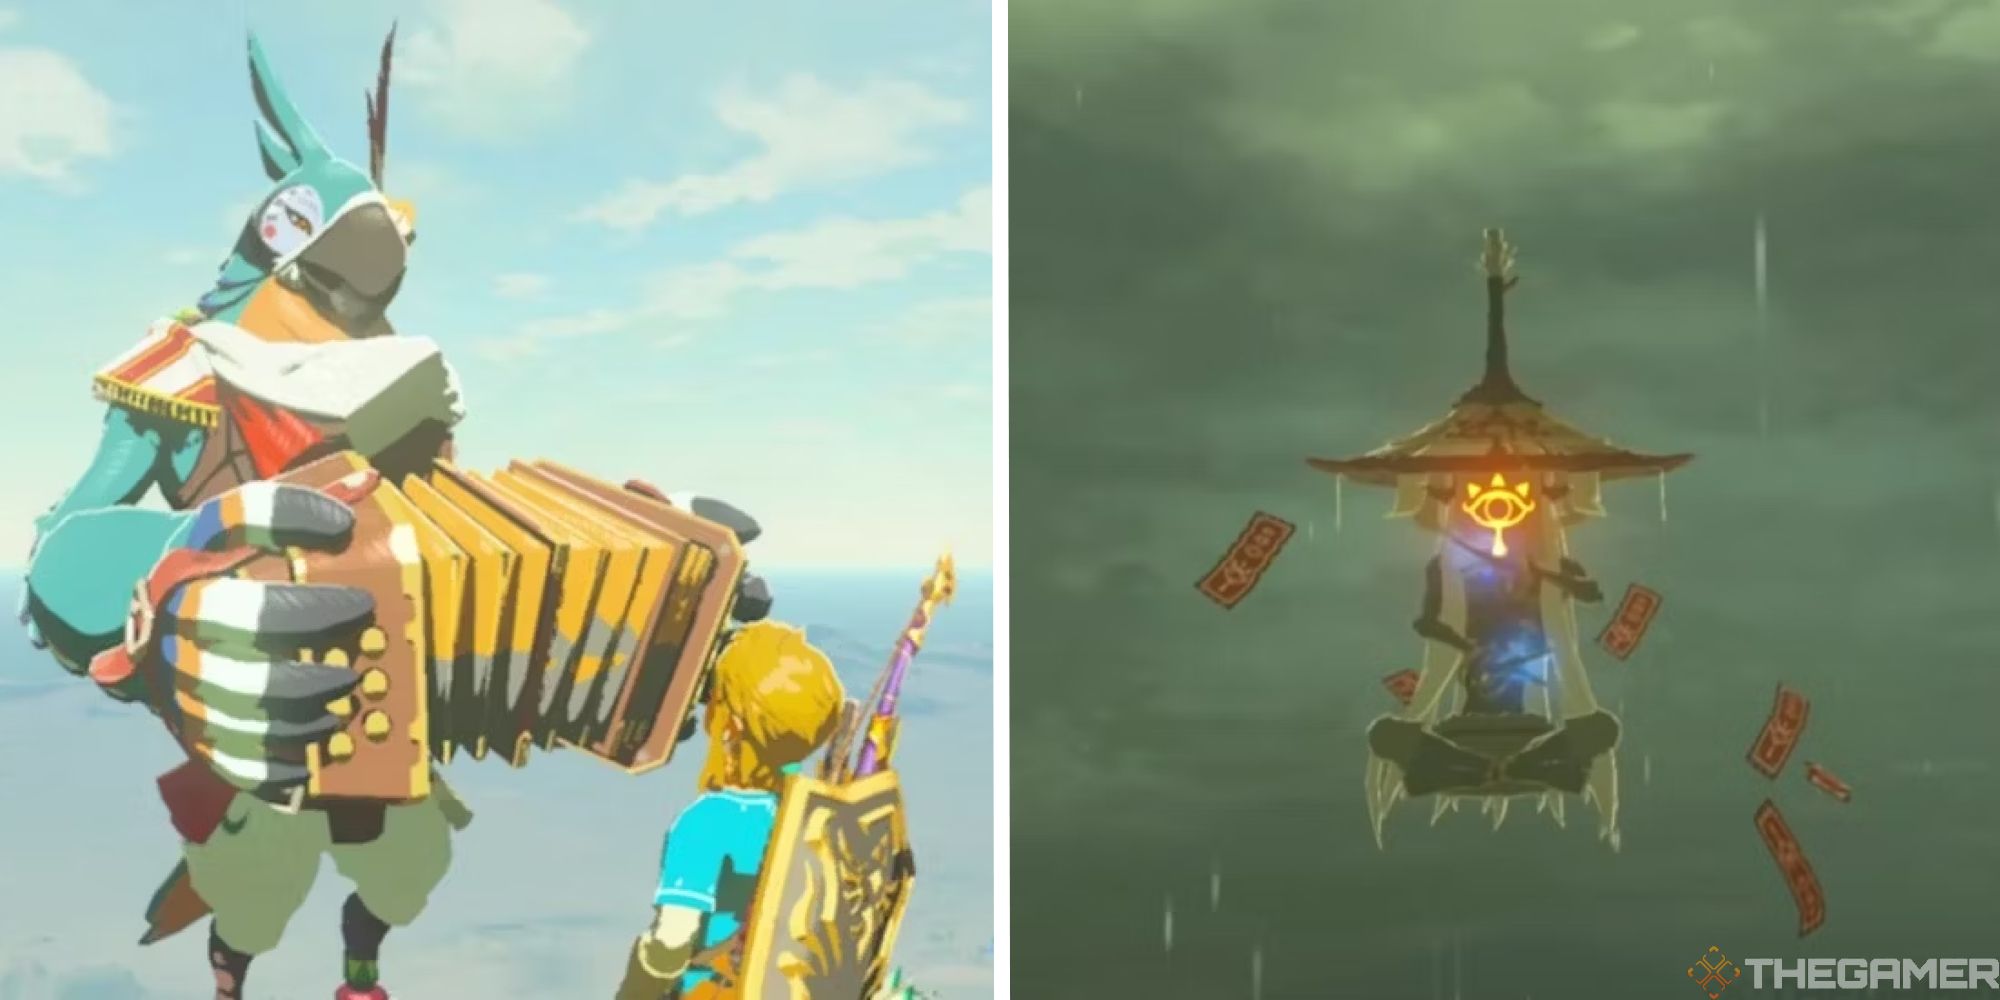 split image showing kass and maz koshia from breath of the wild